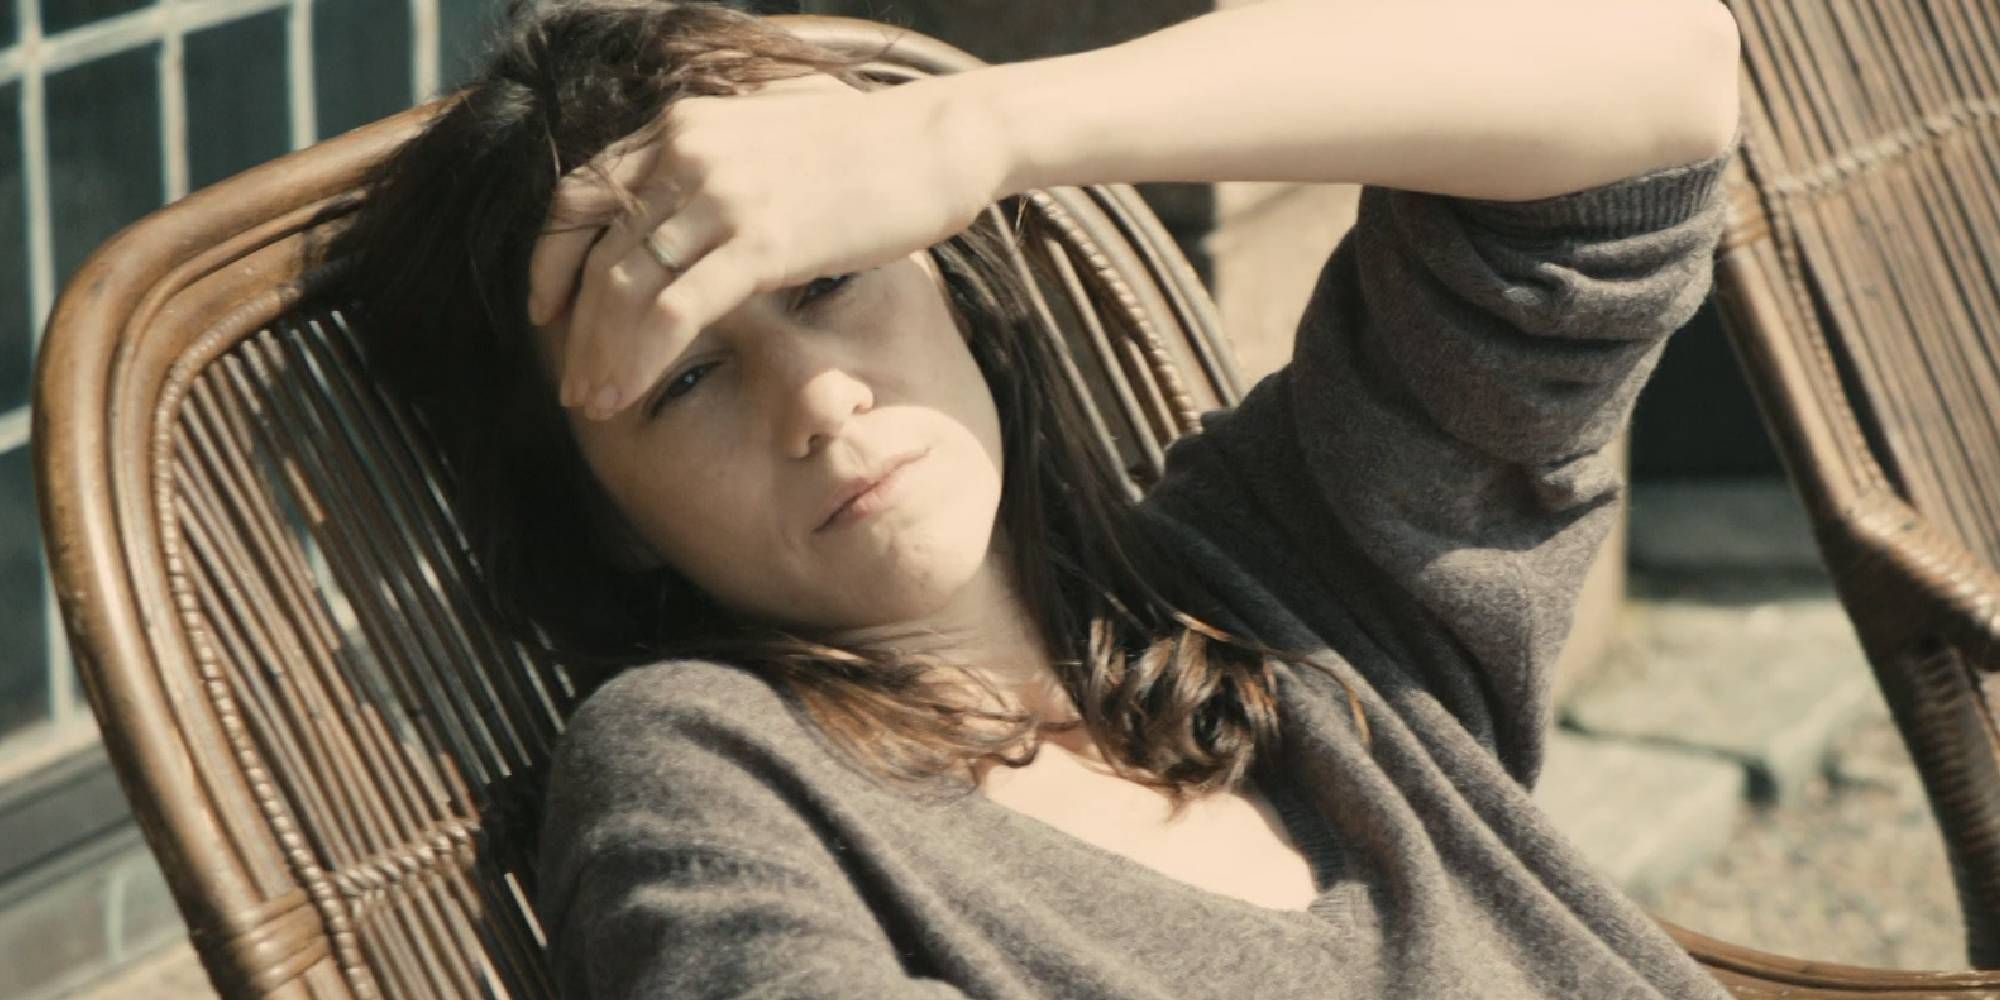 Charlotte Gainsbourg looking at the sun with her hand on her forehead while sitting on a chair outside in Melancholia.